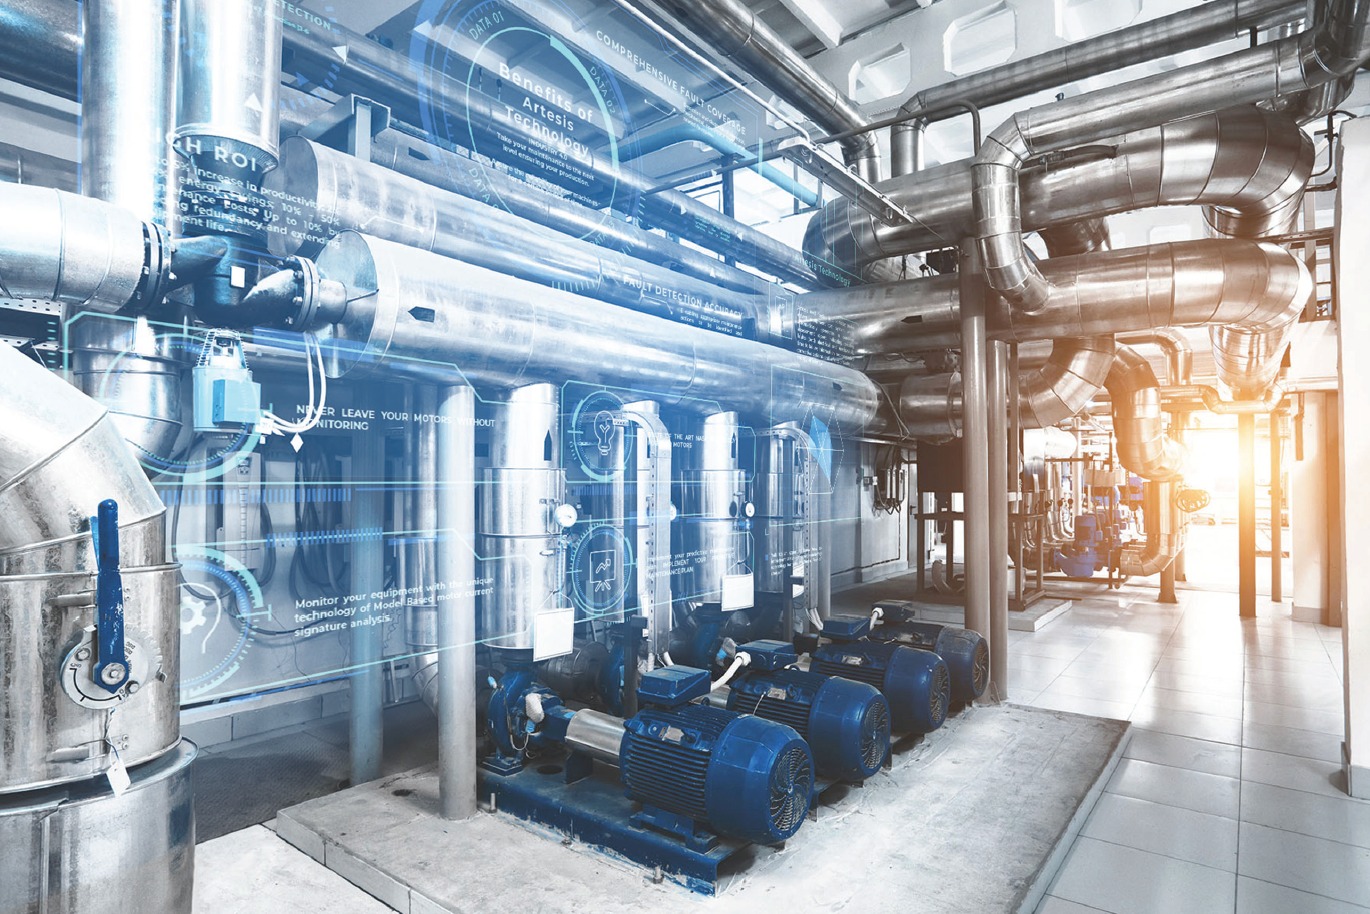 Predictive maintenance is a technique that uses data analysis tools and techniques to detect anomalies in your operation and potential defects in equipment and processes. 